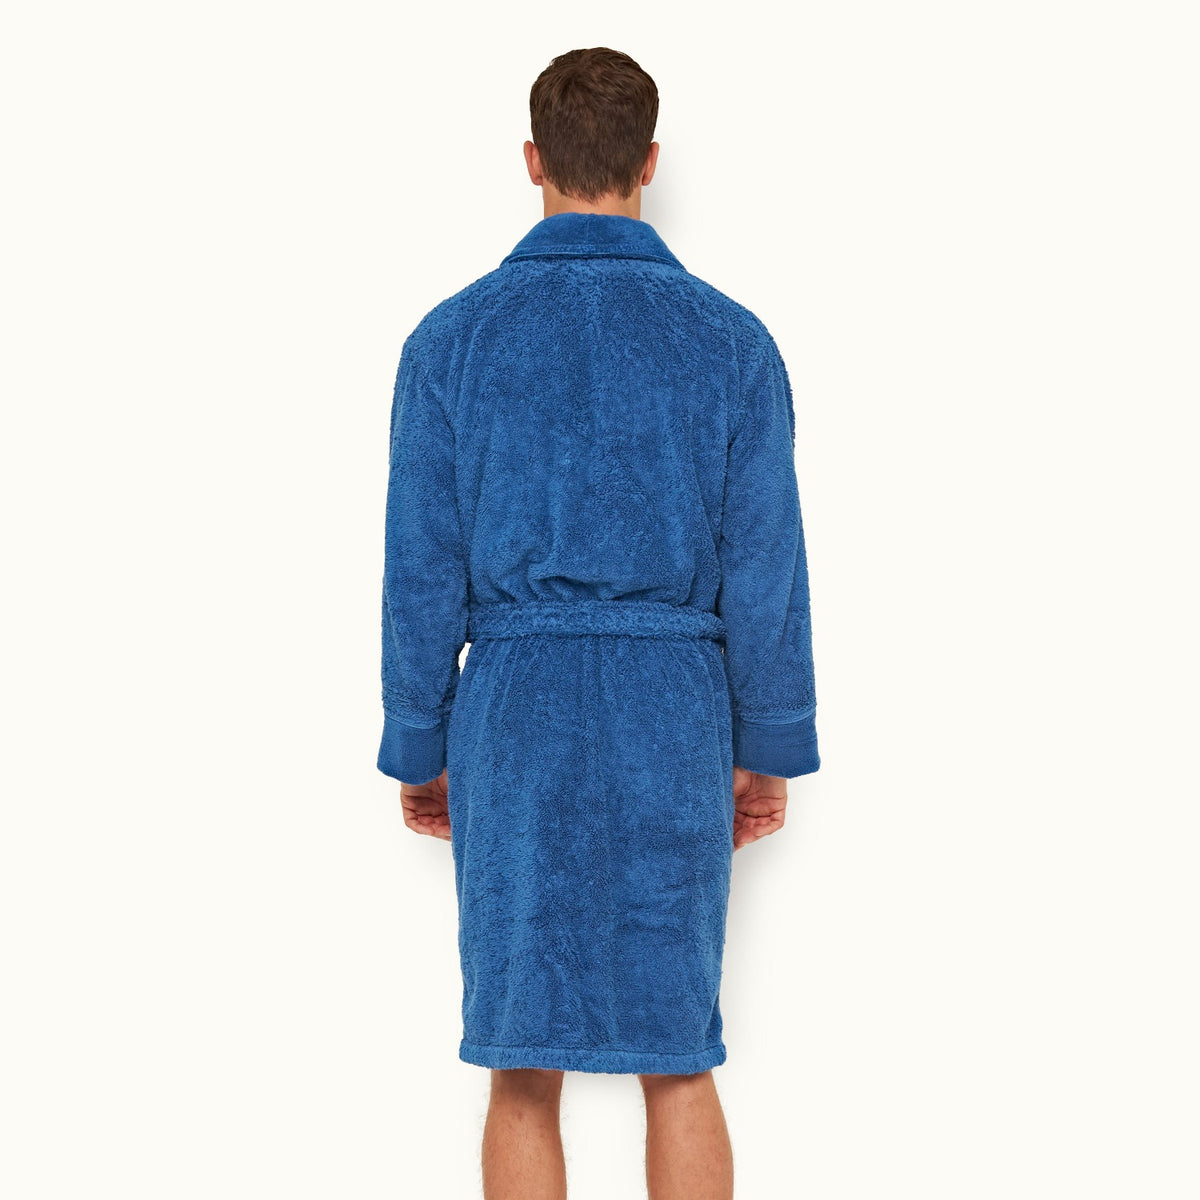 James Bond Mid Blue Dr. No Towelling Robe - By Orlebar Brown